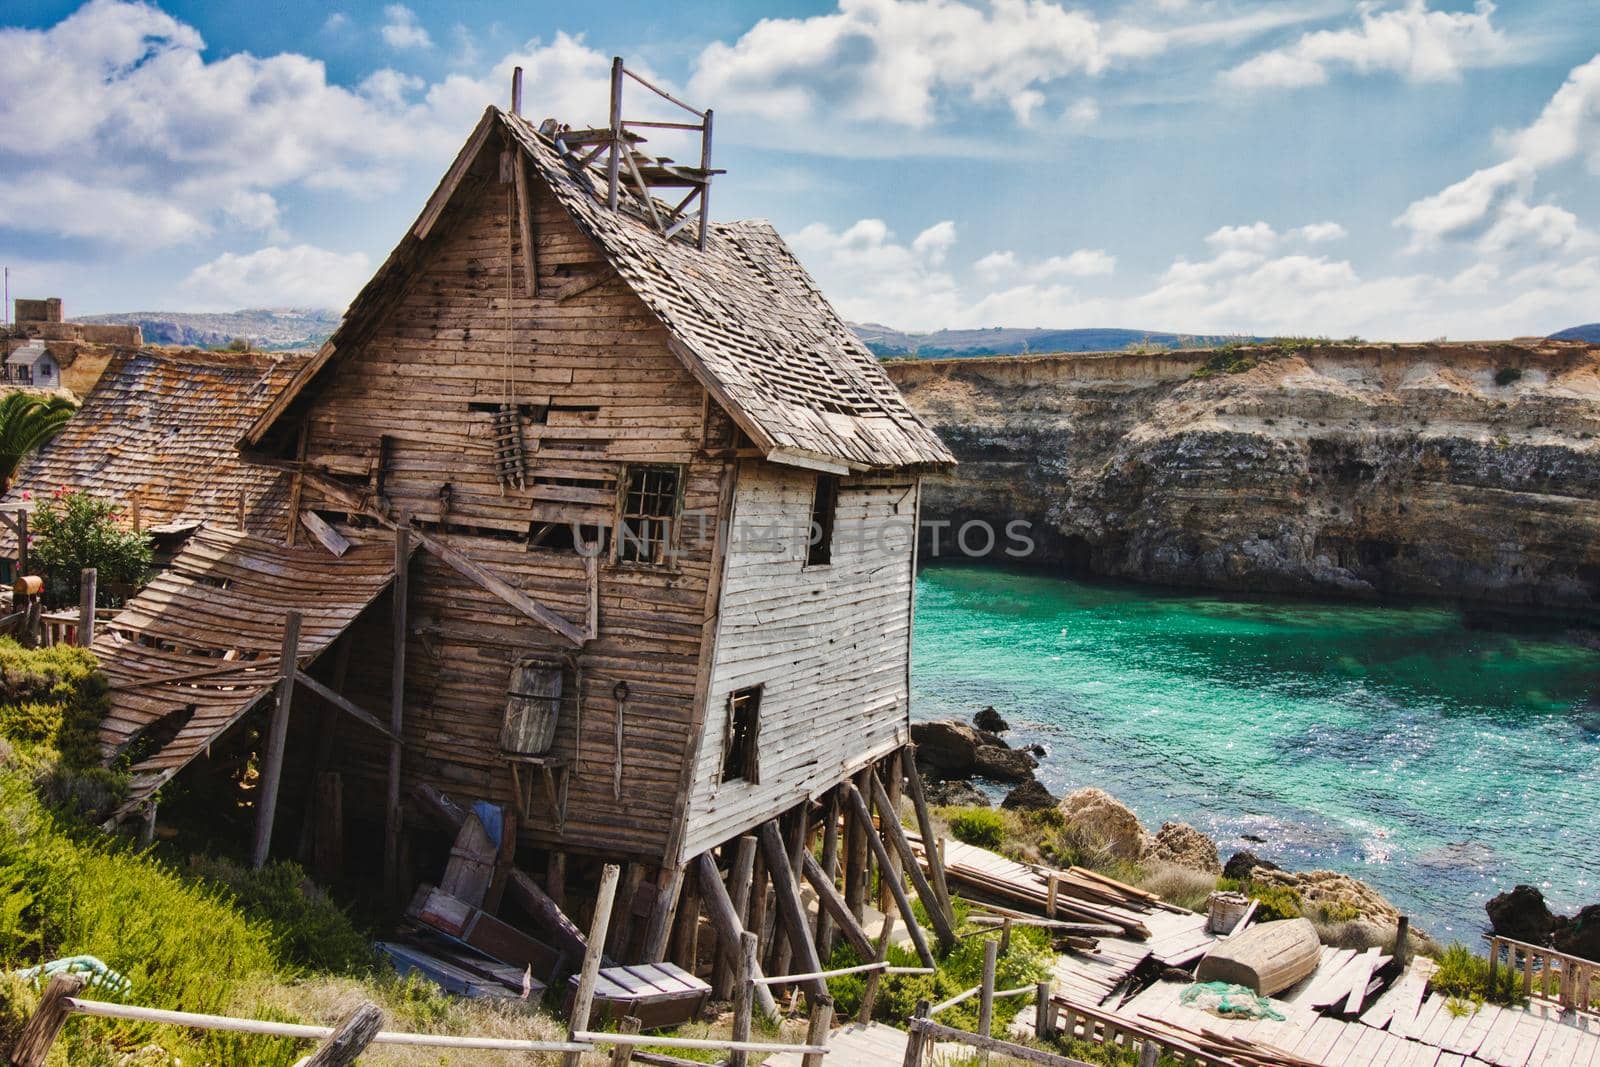 Old abandoned house on the edge of a cliff overlooking the sea and cliffs in the background